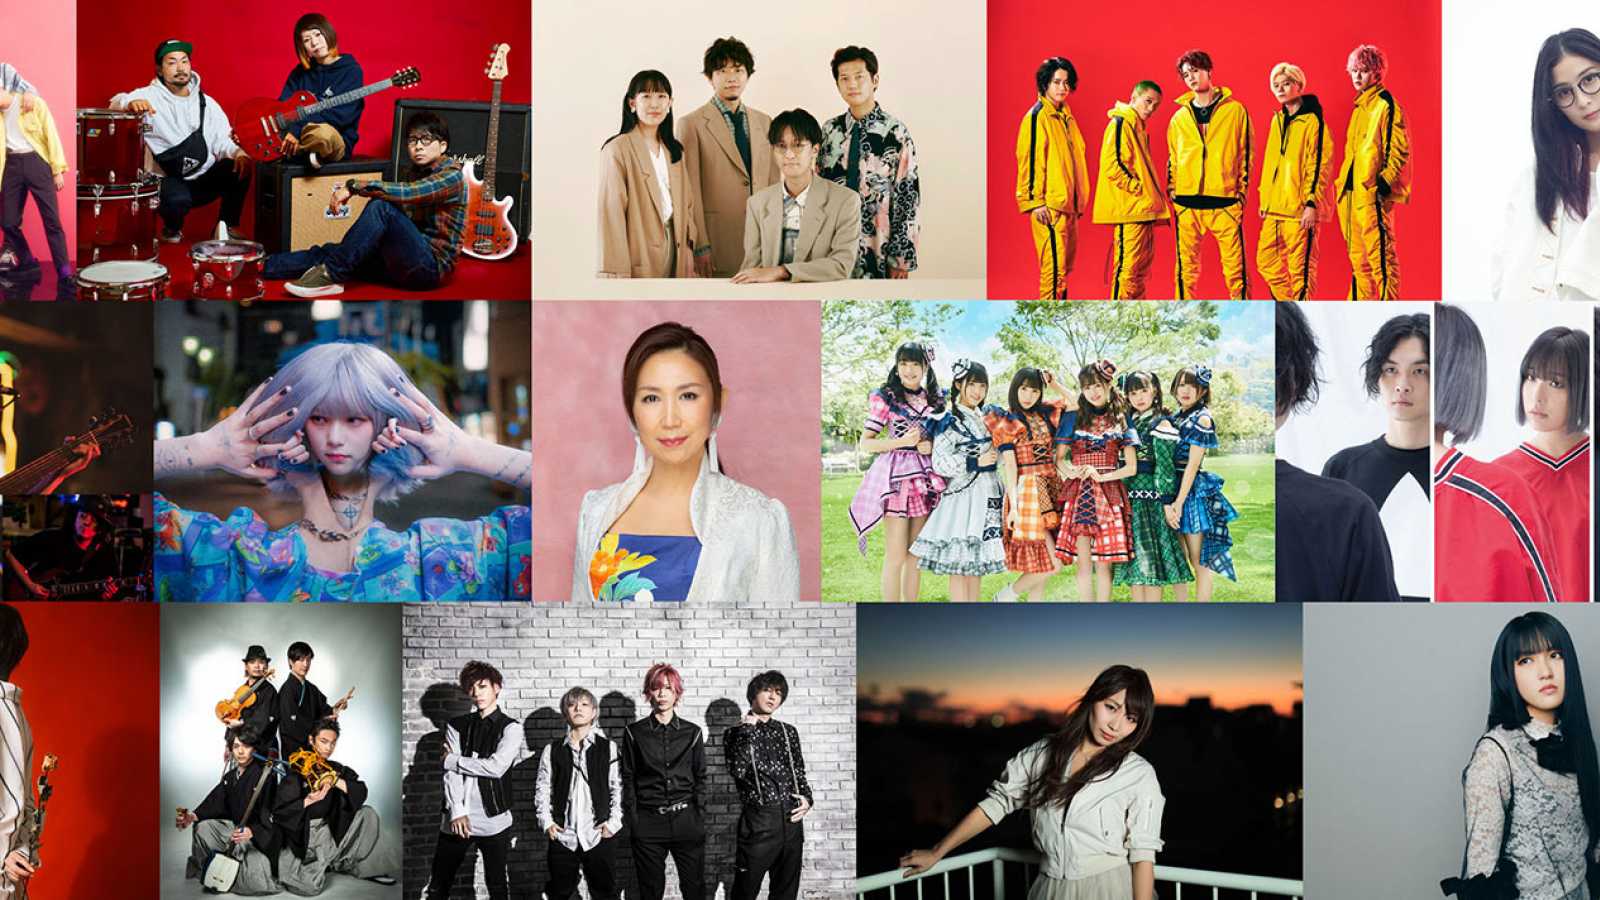 Tokyo International Music Market Announces Free Worldwide Live Stream of Three-Day Music Showcase © TIMM. All rights reserved.